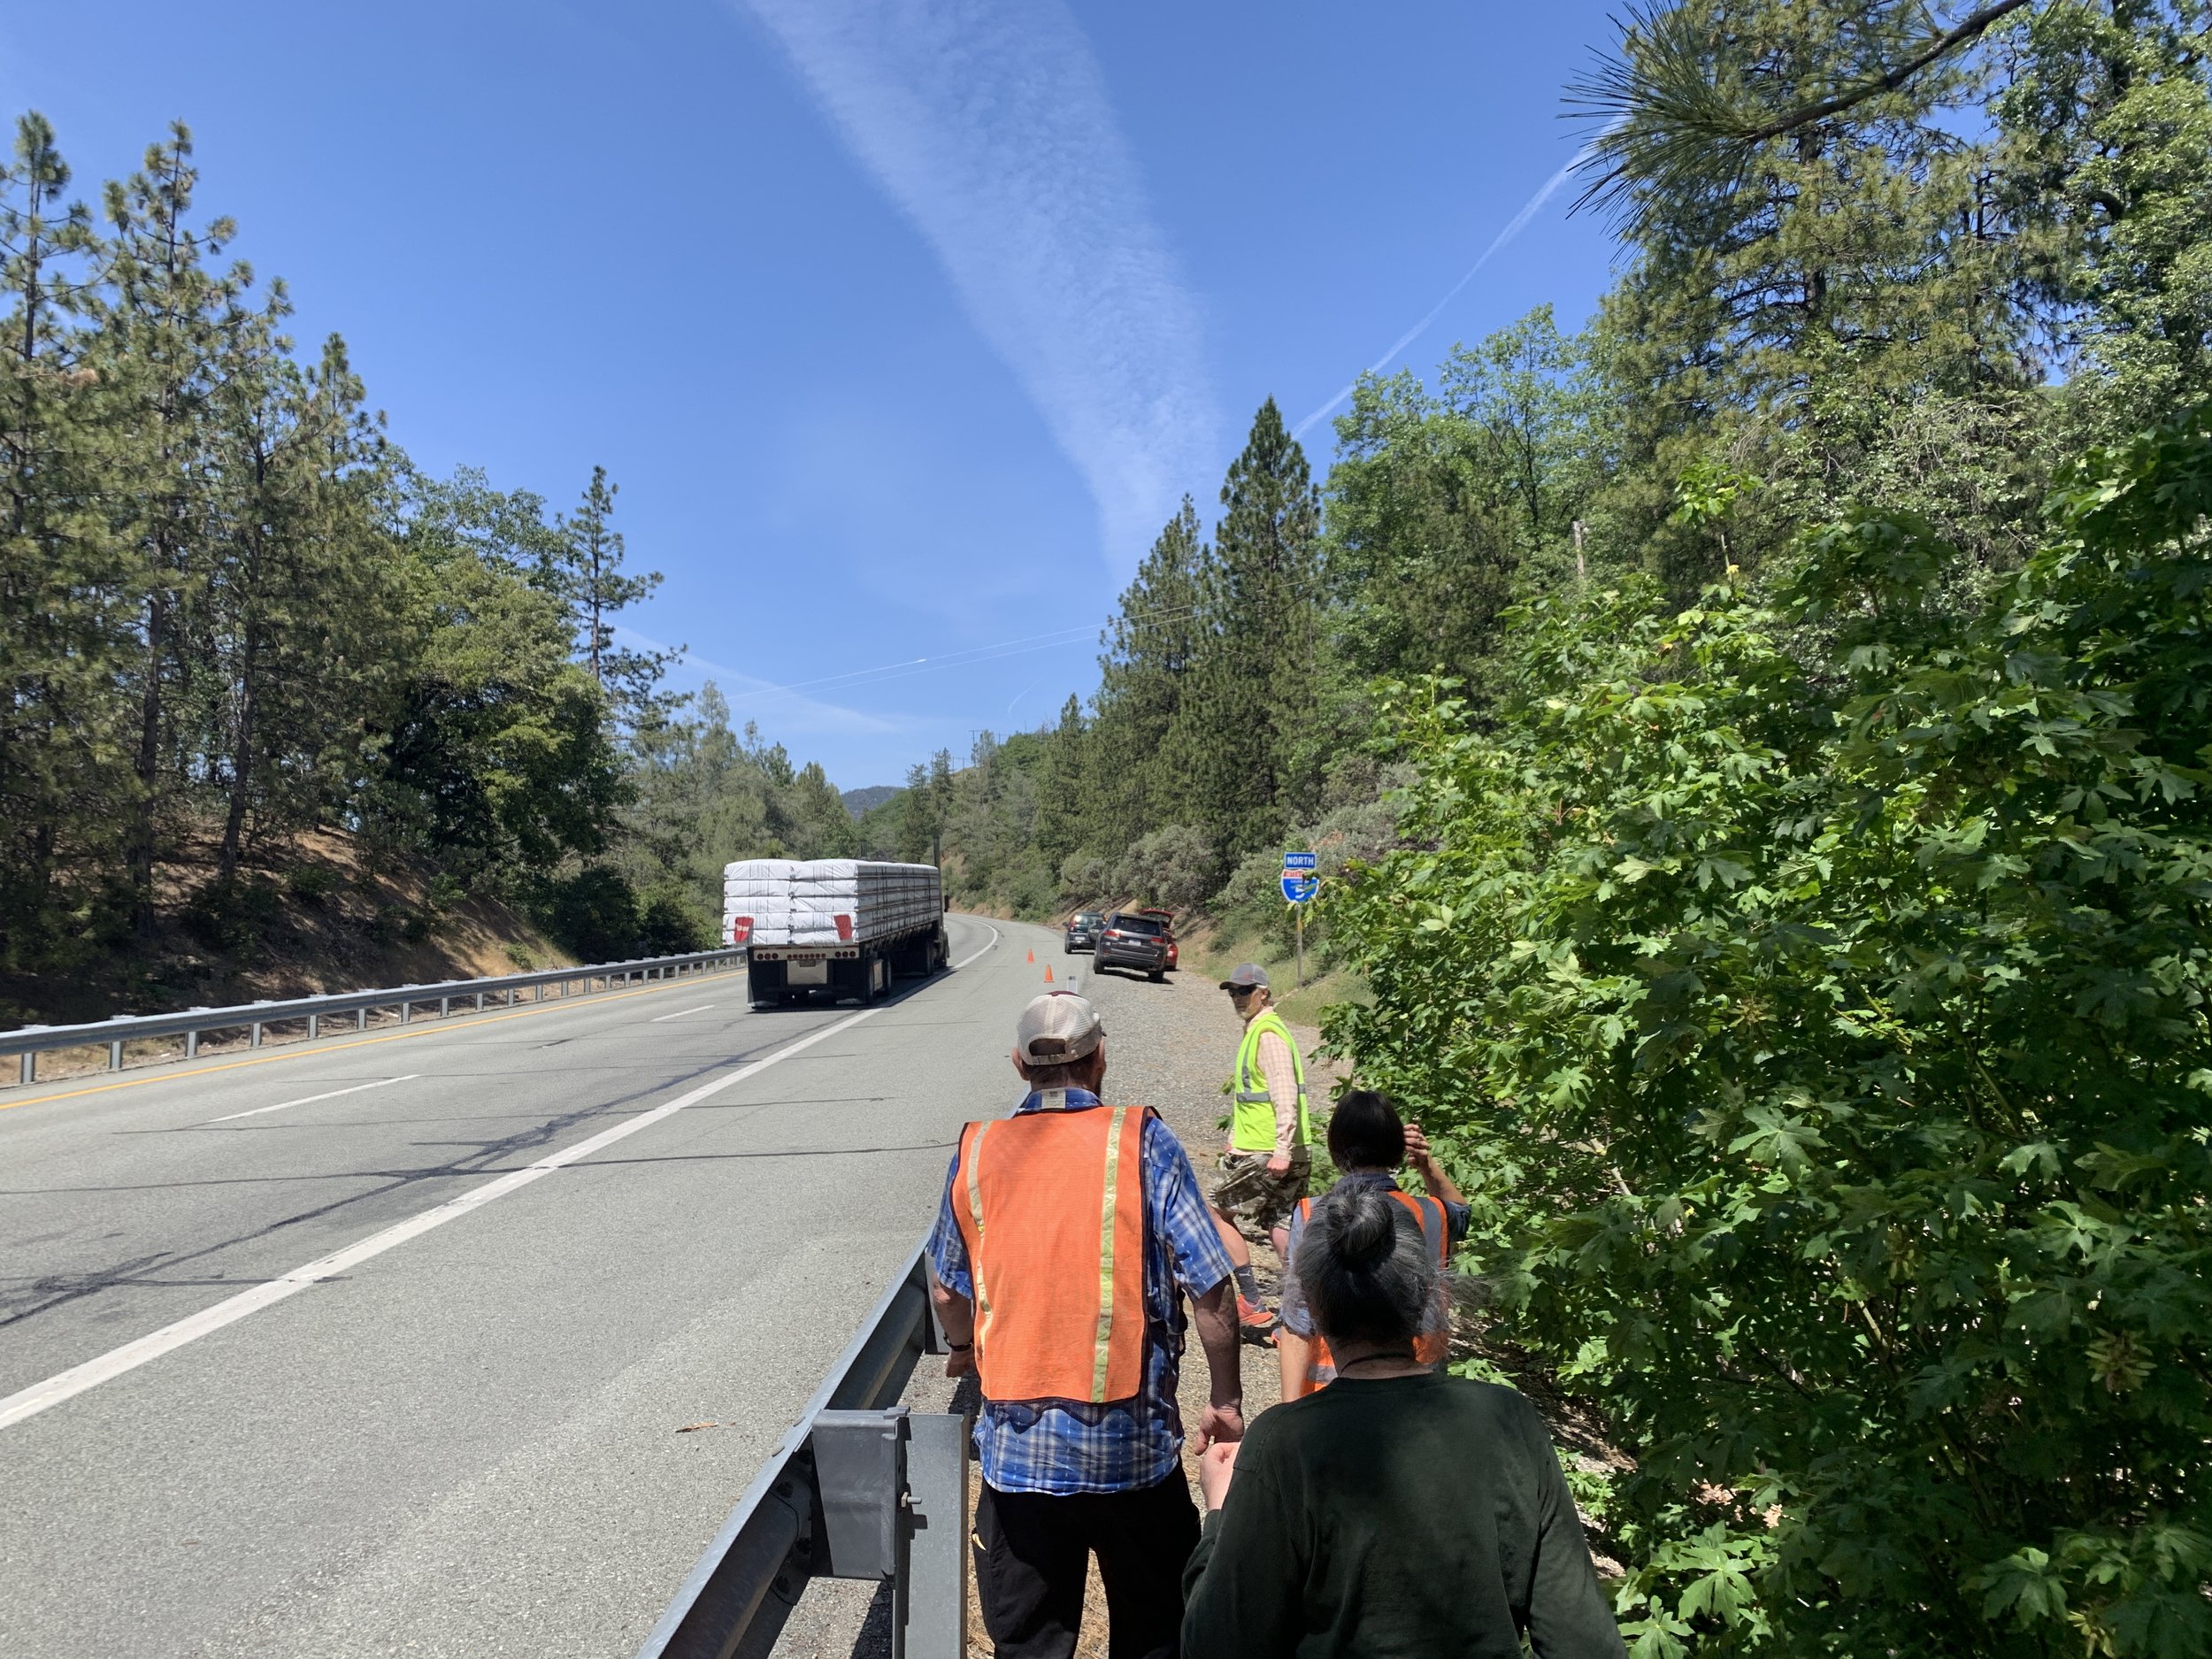  We met with partners at the U.S. Fish and Wildlife Service, Klamath-Siskiyou Connectivity Project, and Mount Shasta Bioregional Ecology Center to identify opportunities for road crossing enhancements that would promote safe passage for wildlife alon